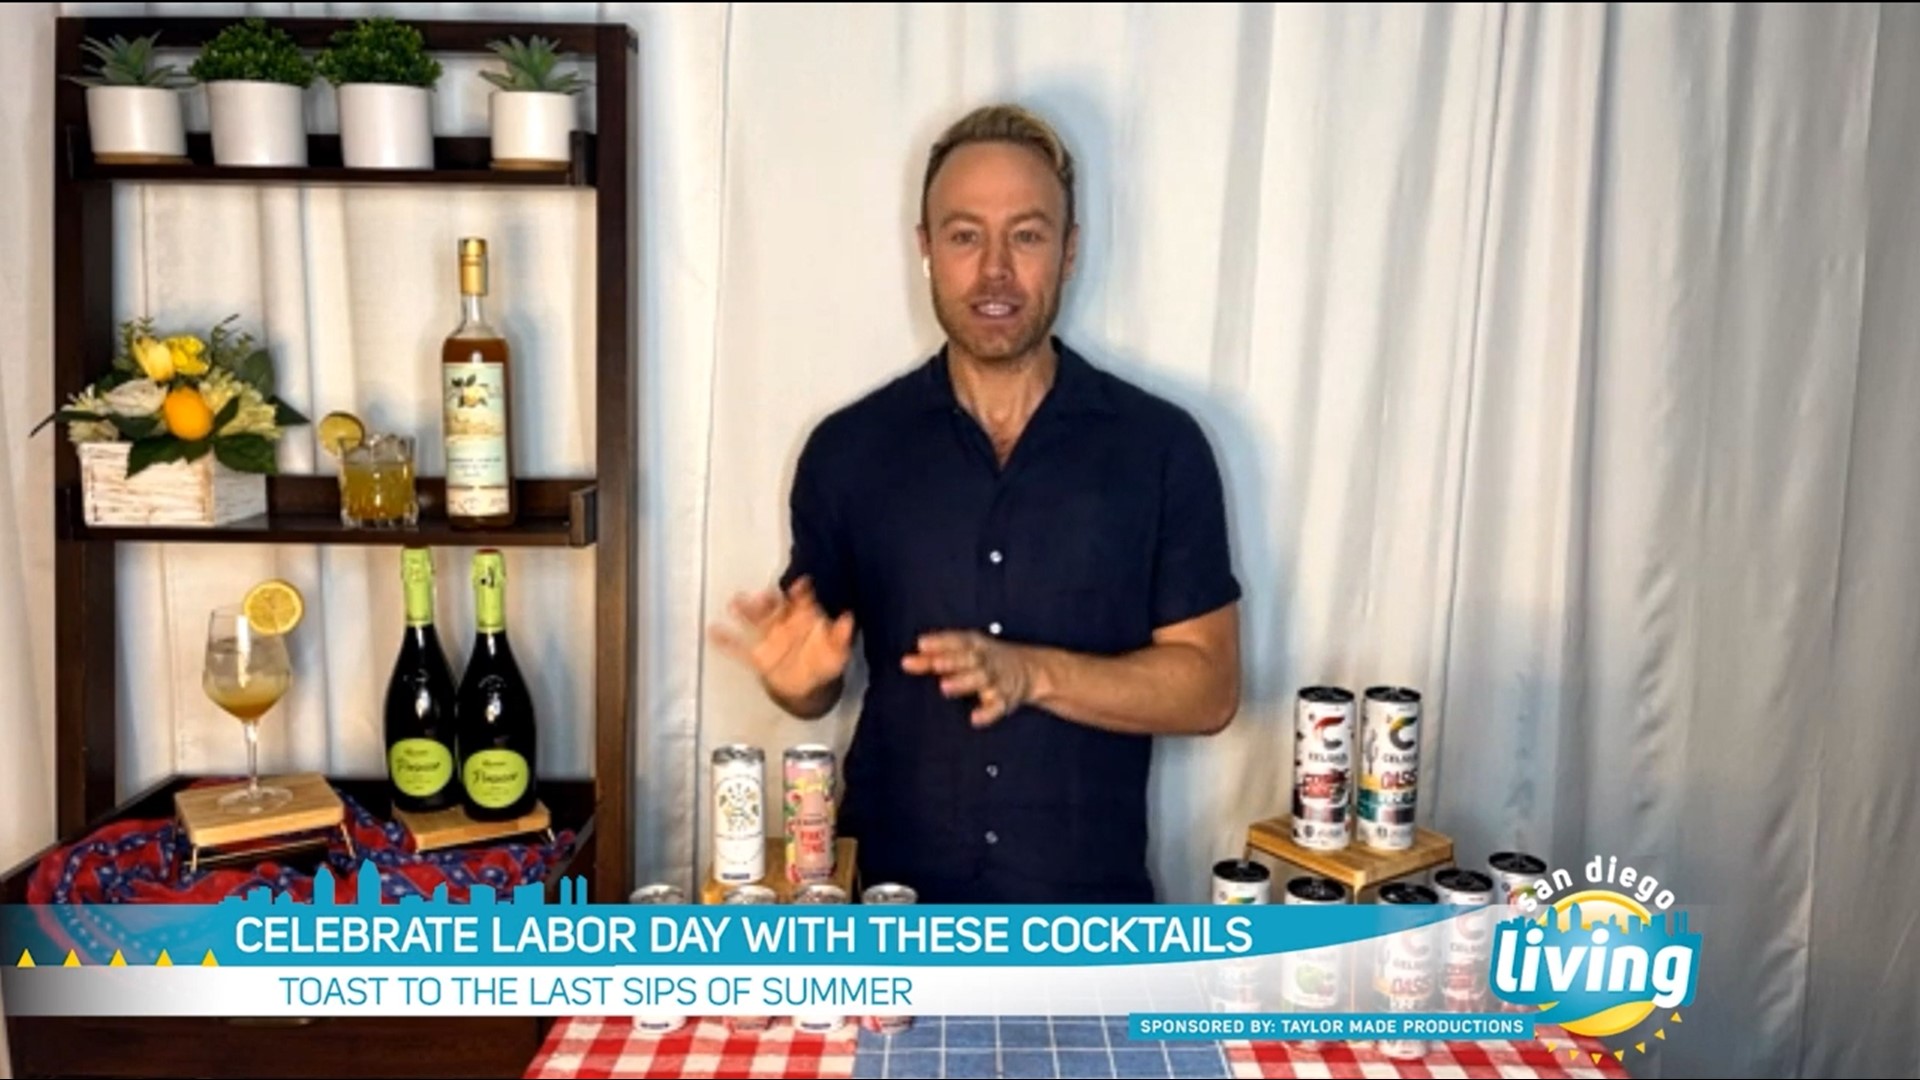 Labor Day Libation Tips for Your Next Backyard Bash. Sponsored by Taylor Made Productions